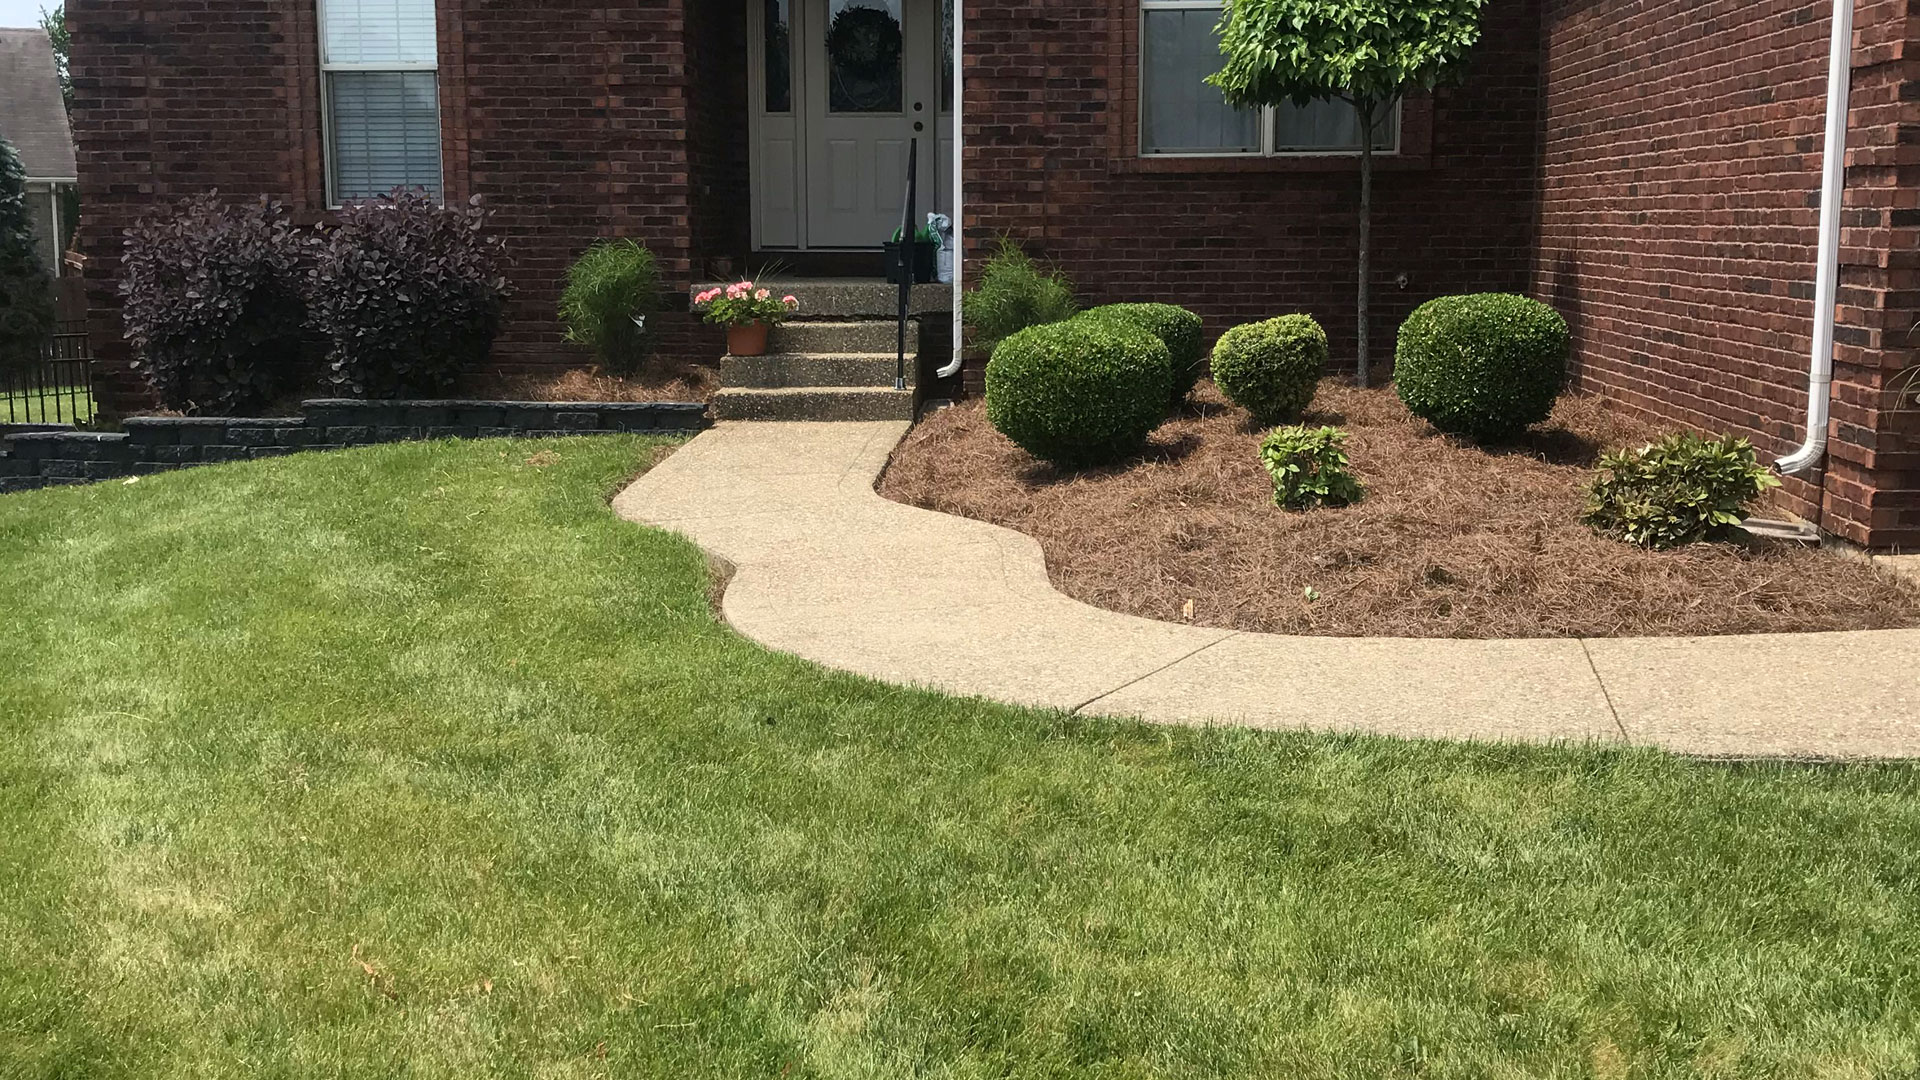 Landscape design and installation in New Albany, IN.